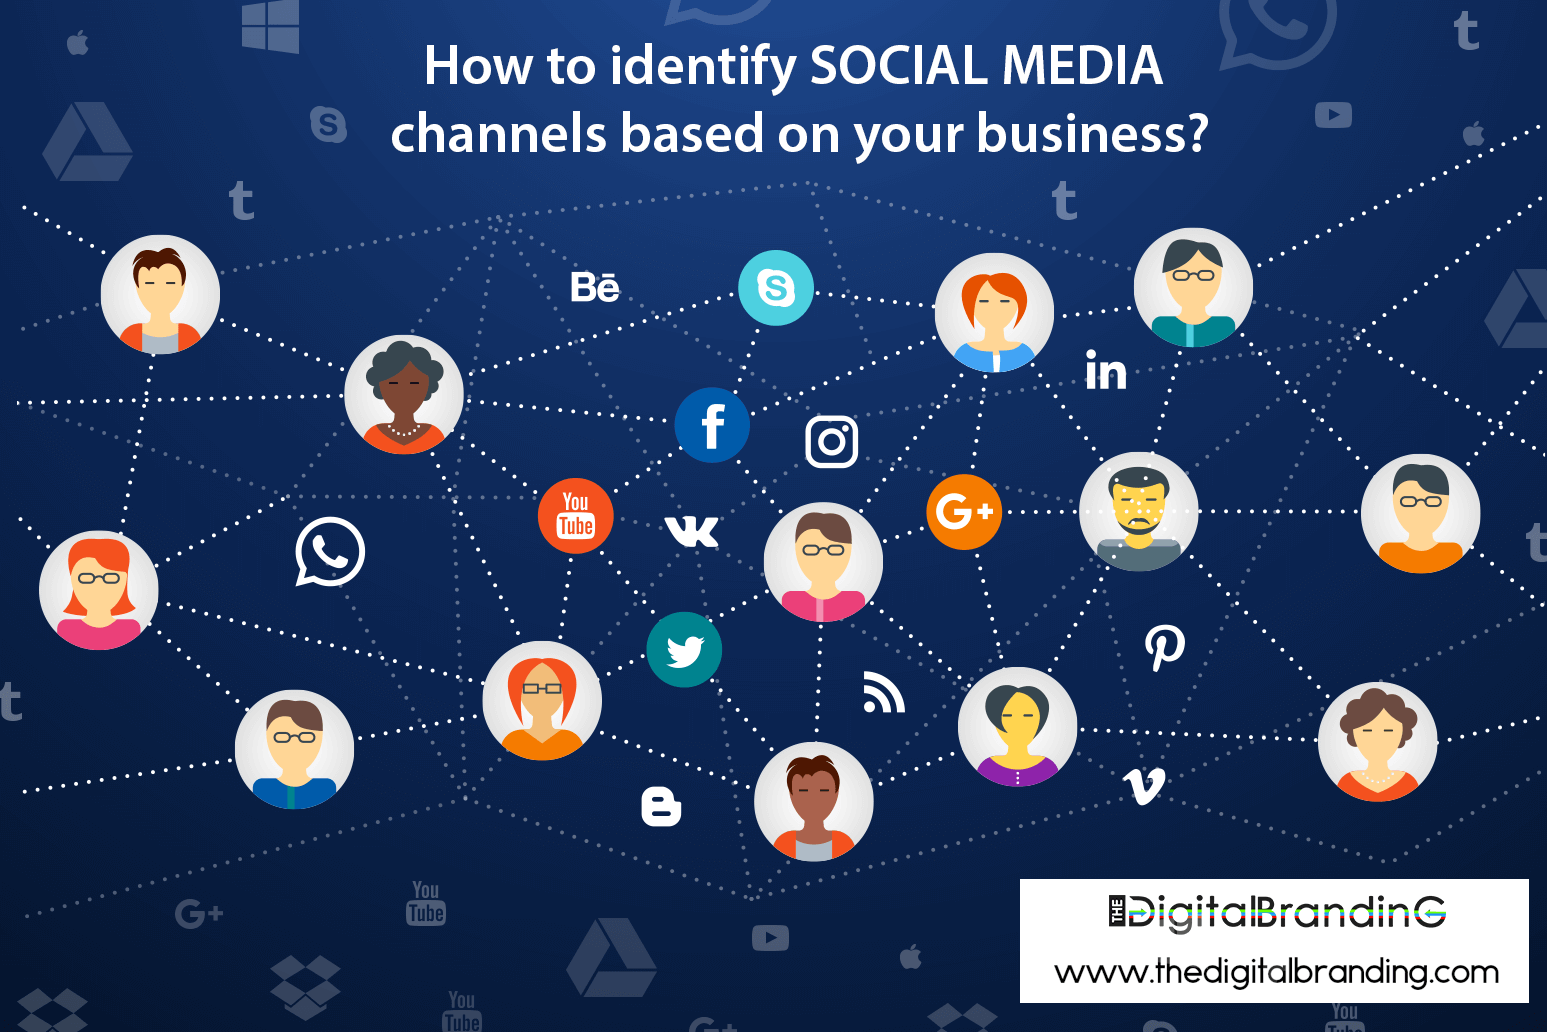 How to identify social media channels based on your business?